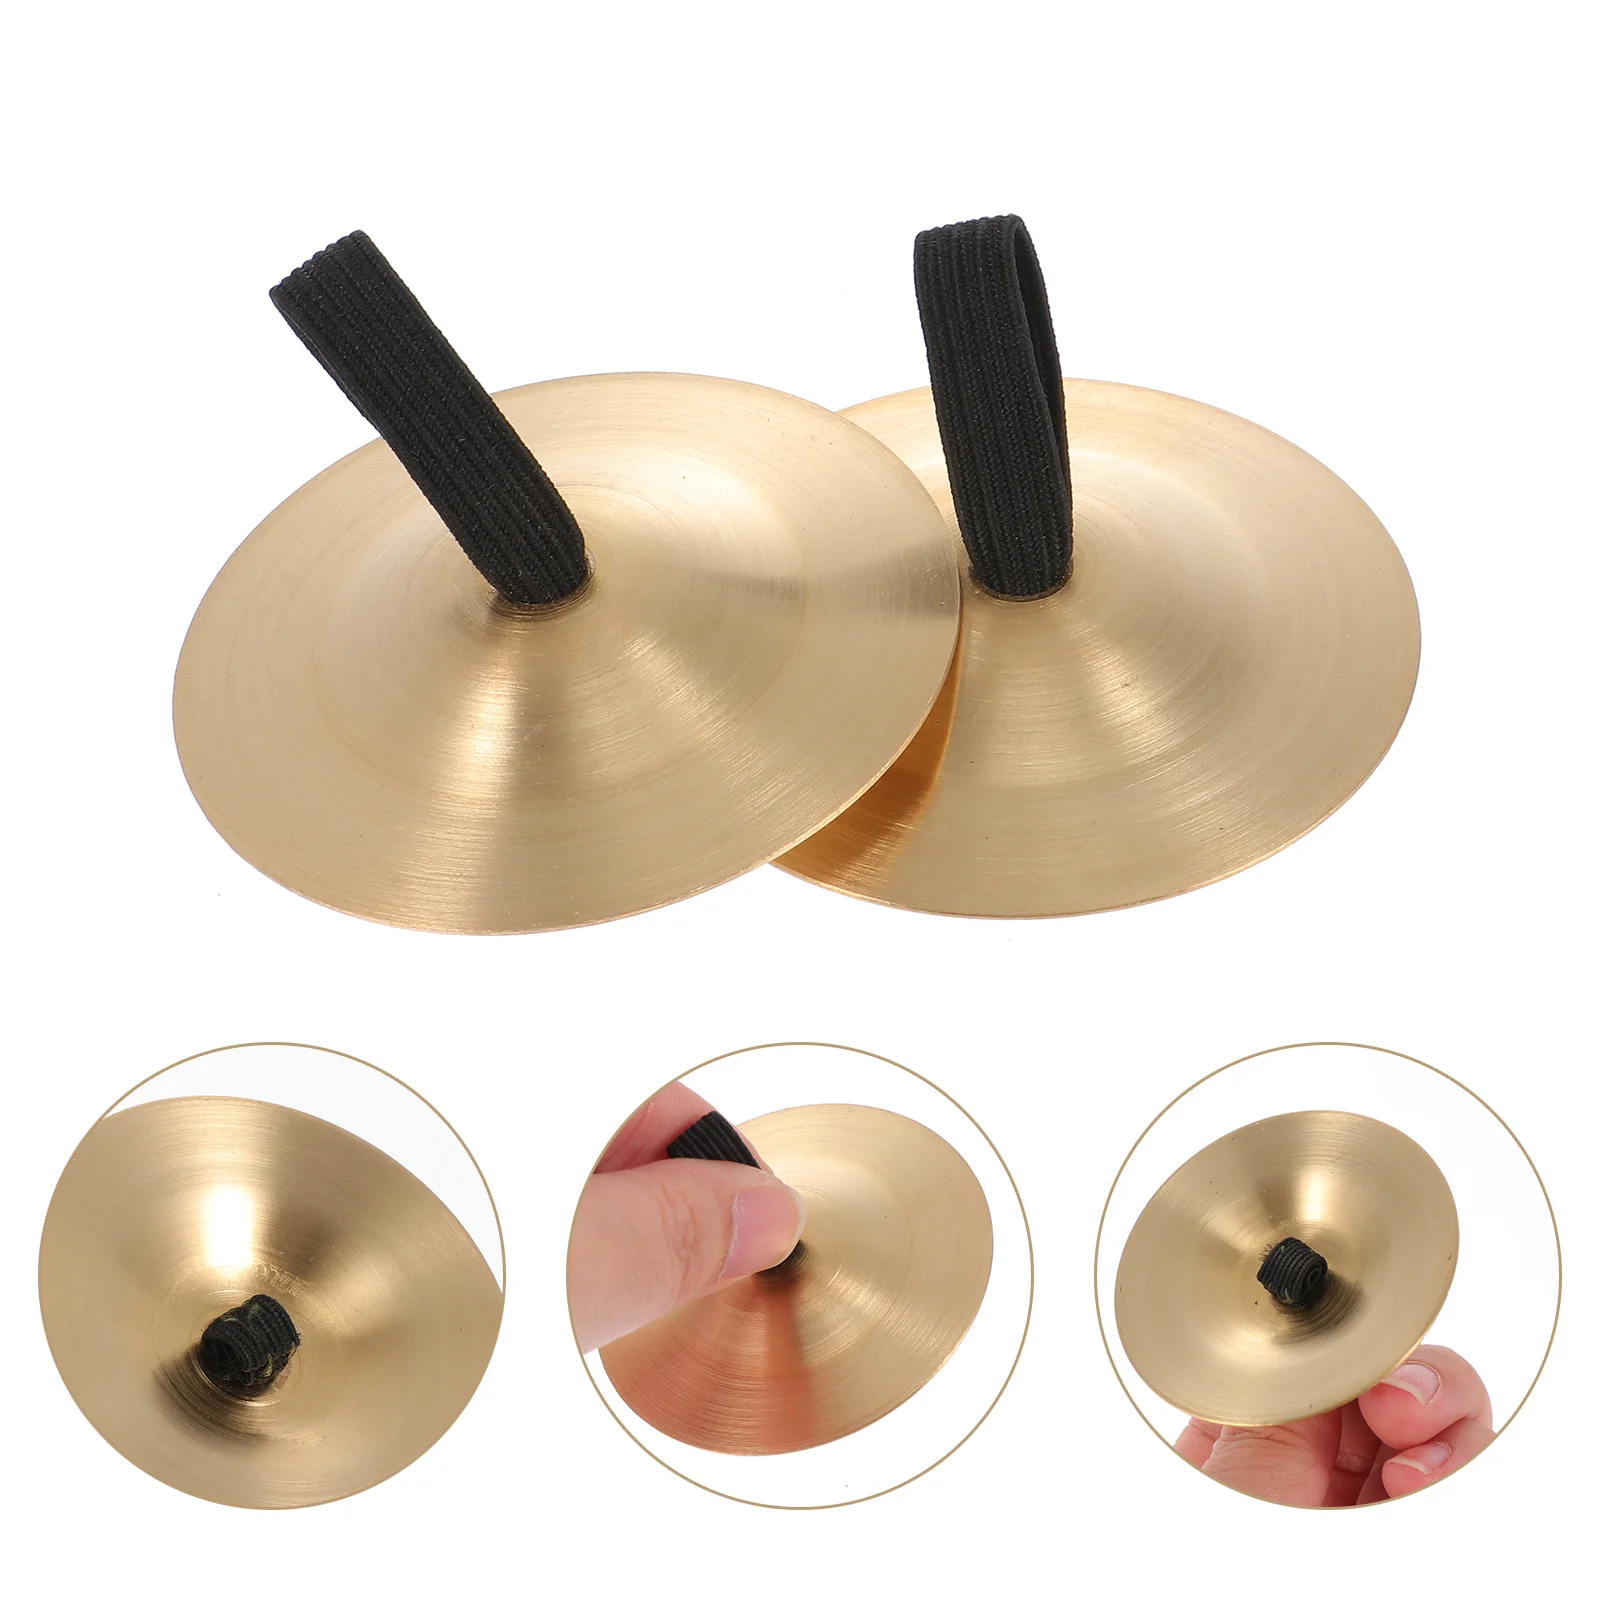 Finger Cymbals Cymbal Belly Percussion Dance Instrument Chimes Dancing Zills Hand Kids Bell Clapper Tibetan Musical Tingsha